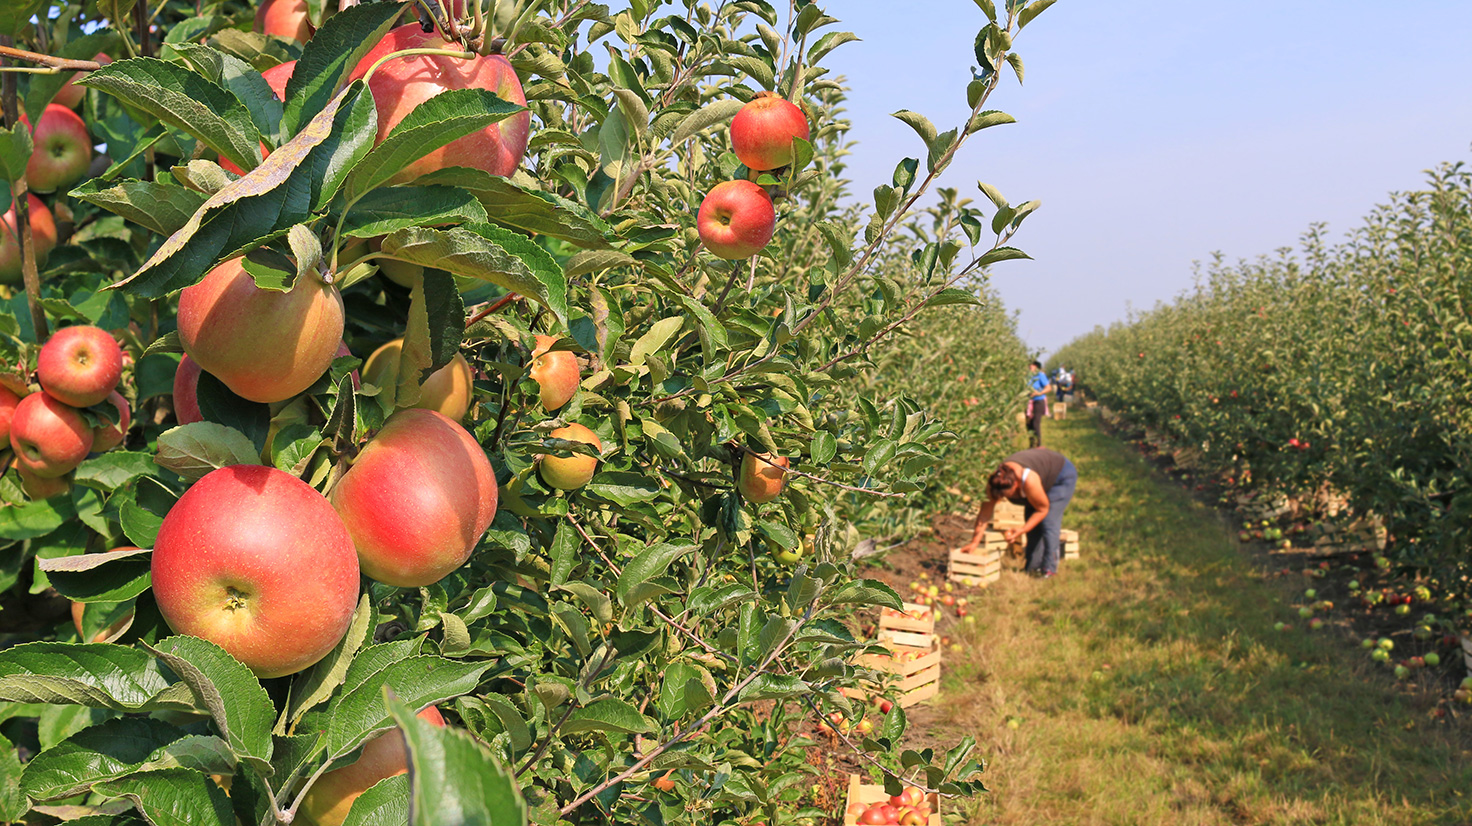 Are you ready for the upcoming fruit picking season?